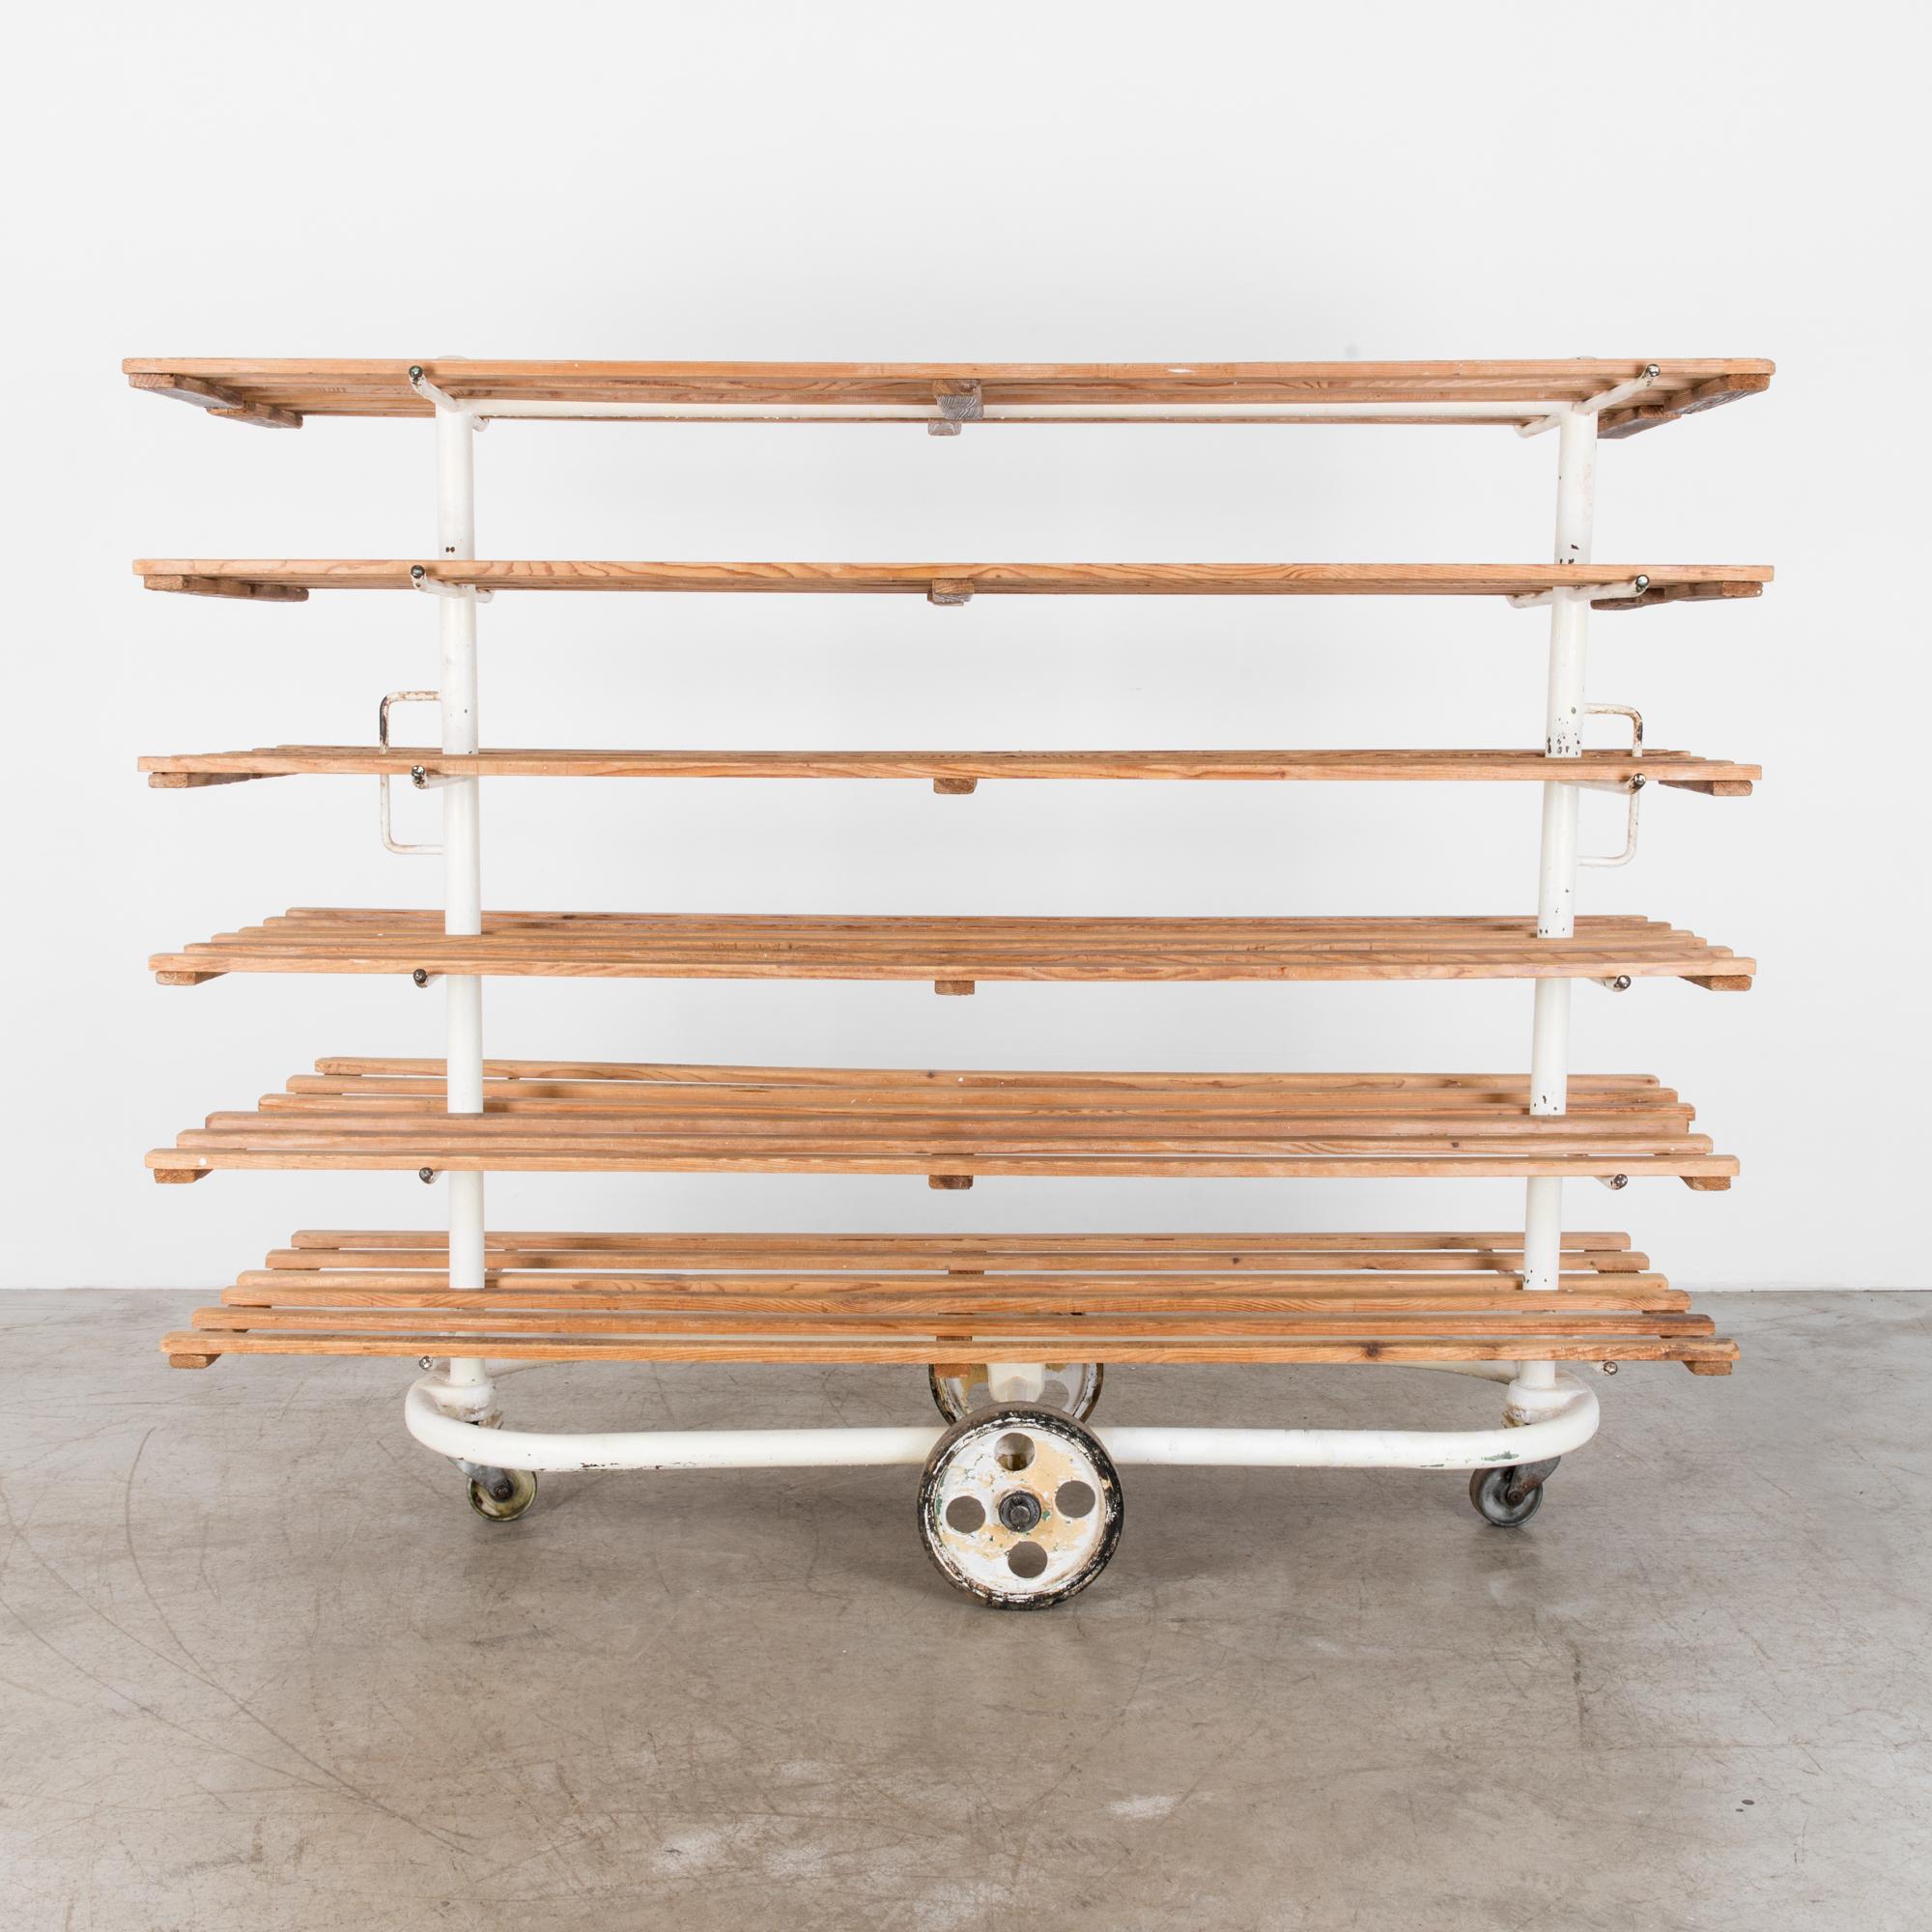 Rustic bread cart from Czechia, circa 1950 with six shelves. The practical steel frame is enamelled in white, alongside naturally finished wooden shelves for a bright and contemporary effect. A white geometric frame in tubular steel contrasts the